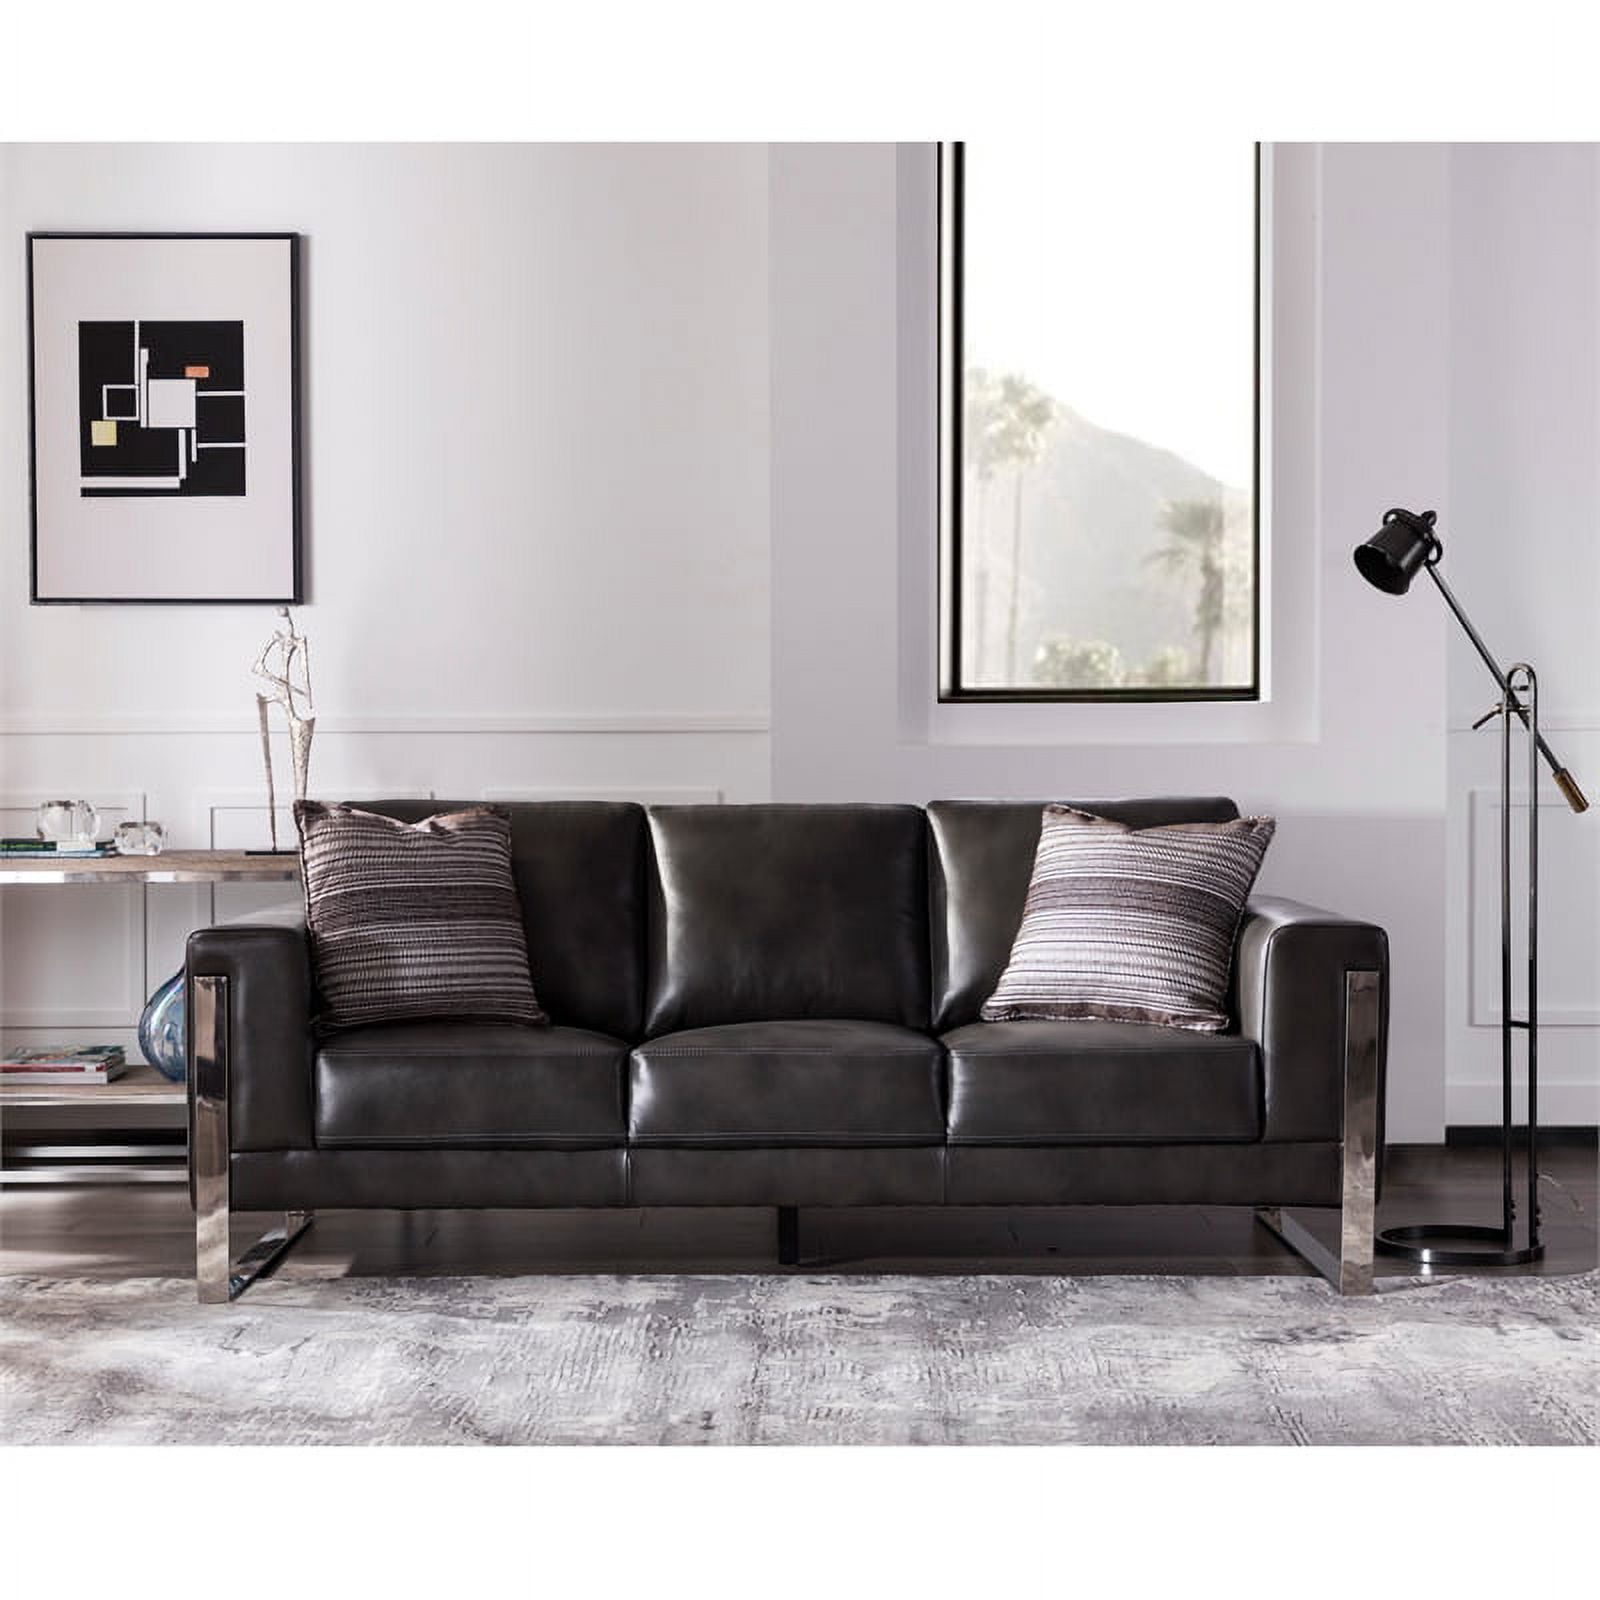 Maklaine Leather Sofa With Metal Leg In